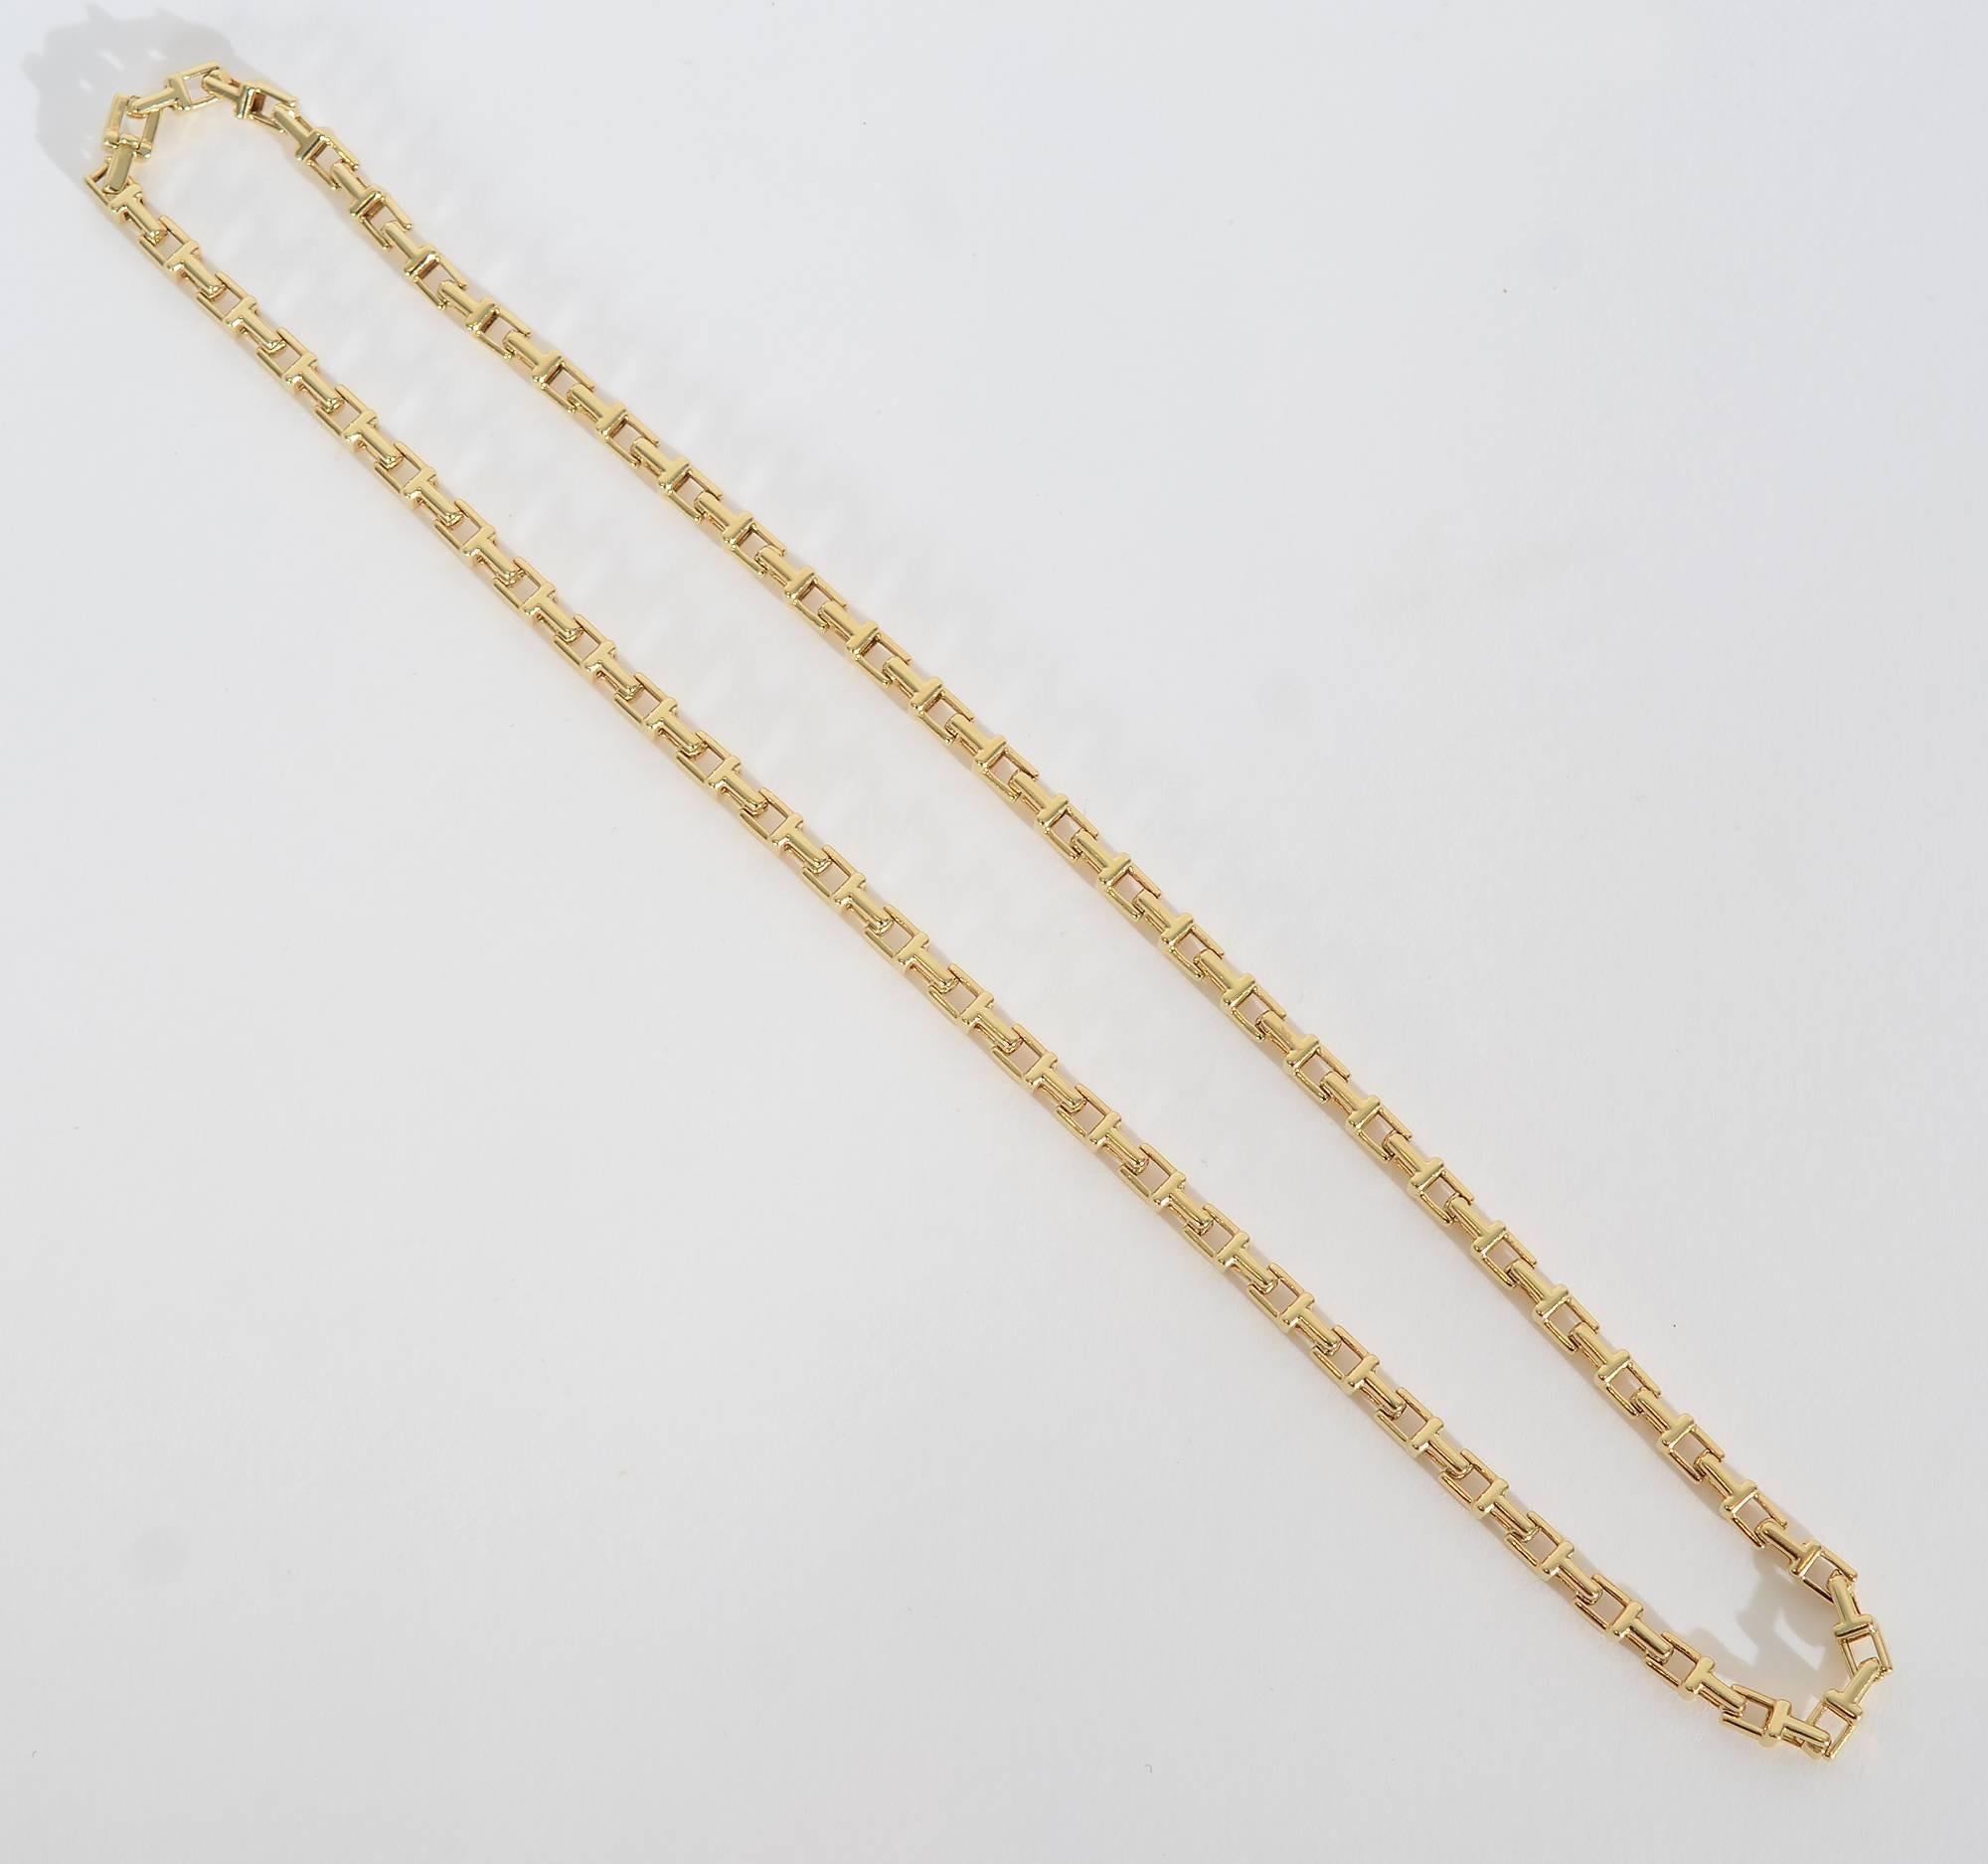 This square links 18 karat necklace by Tiffany easily stands on its own as a decorative necklace. In addition, it would work equally well a chain from which to hang a pendant. It measures 20 inches in length and 3/16 of an inch in width.